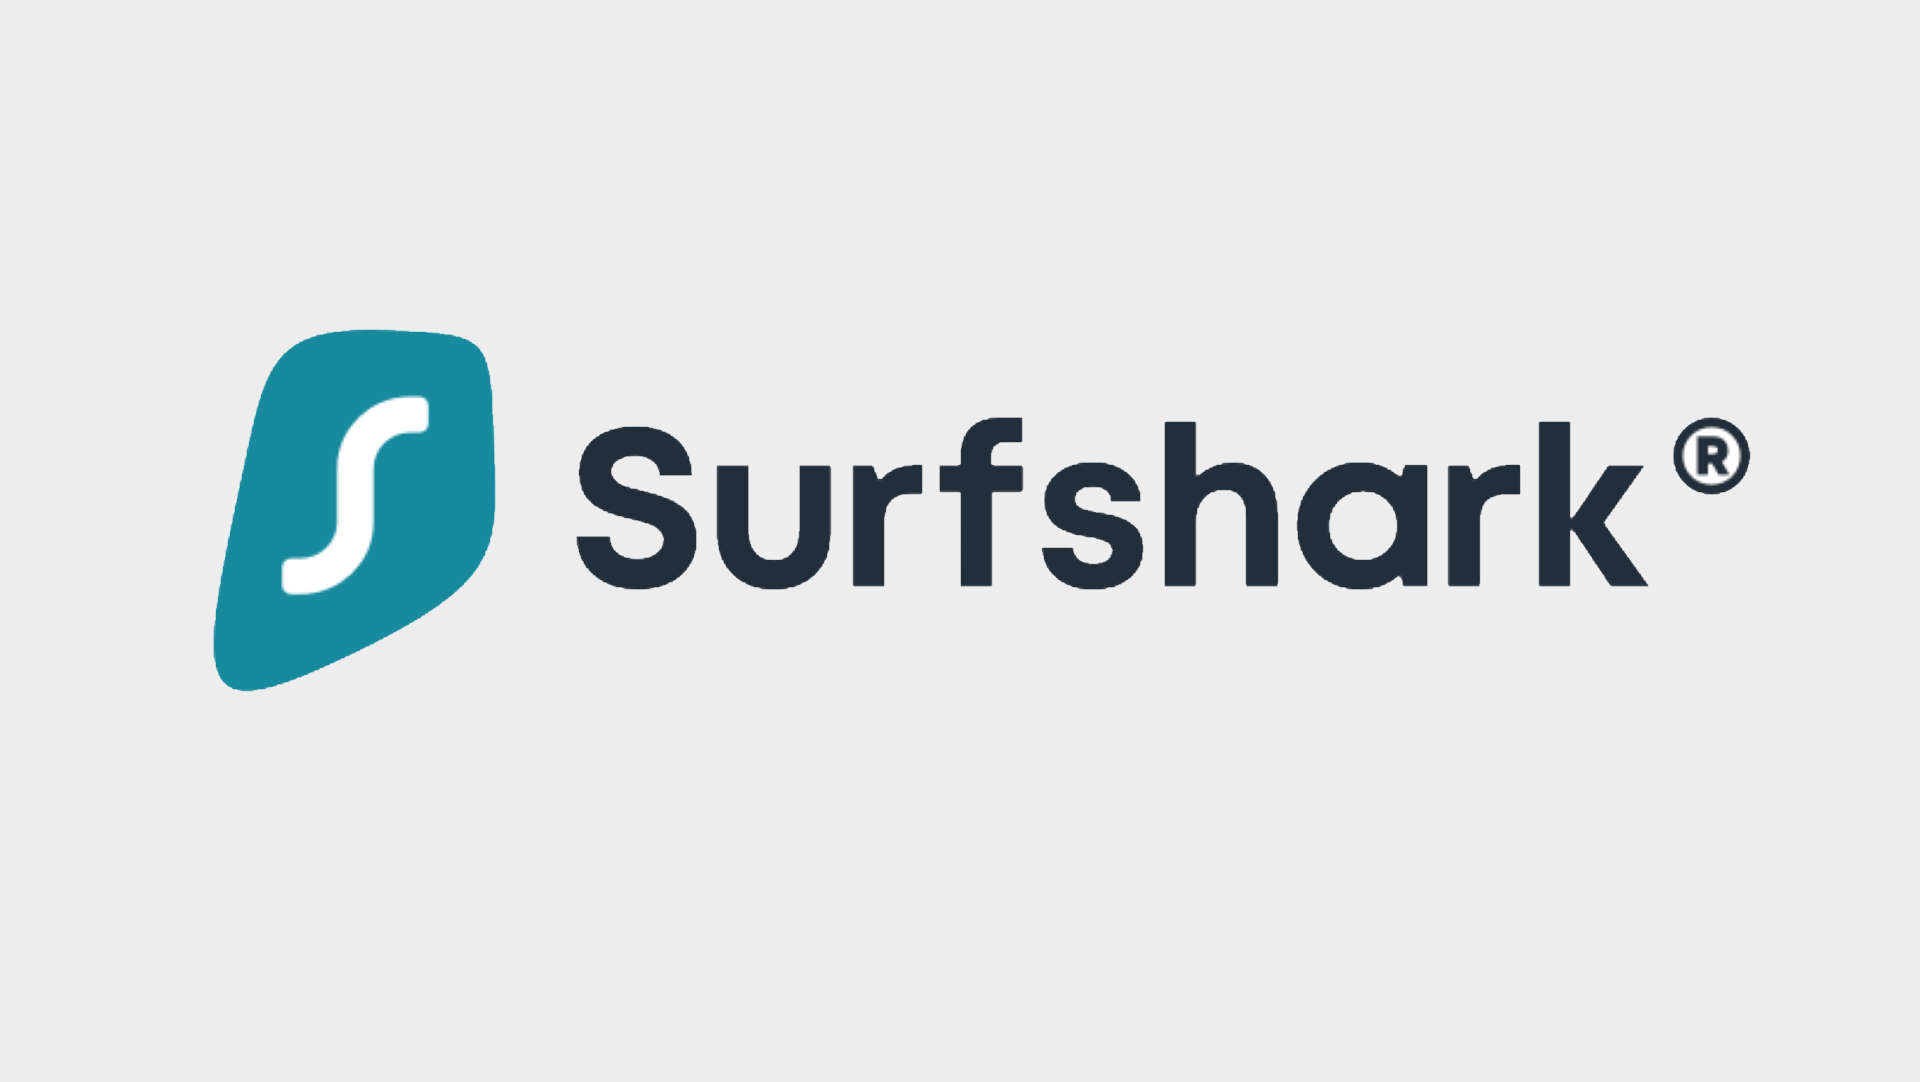 The Surfshark logo on a grey background